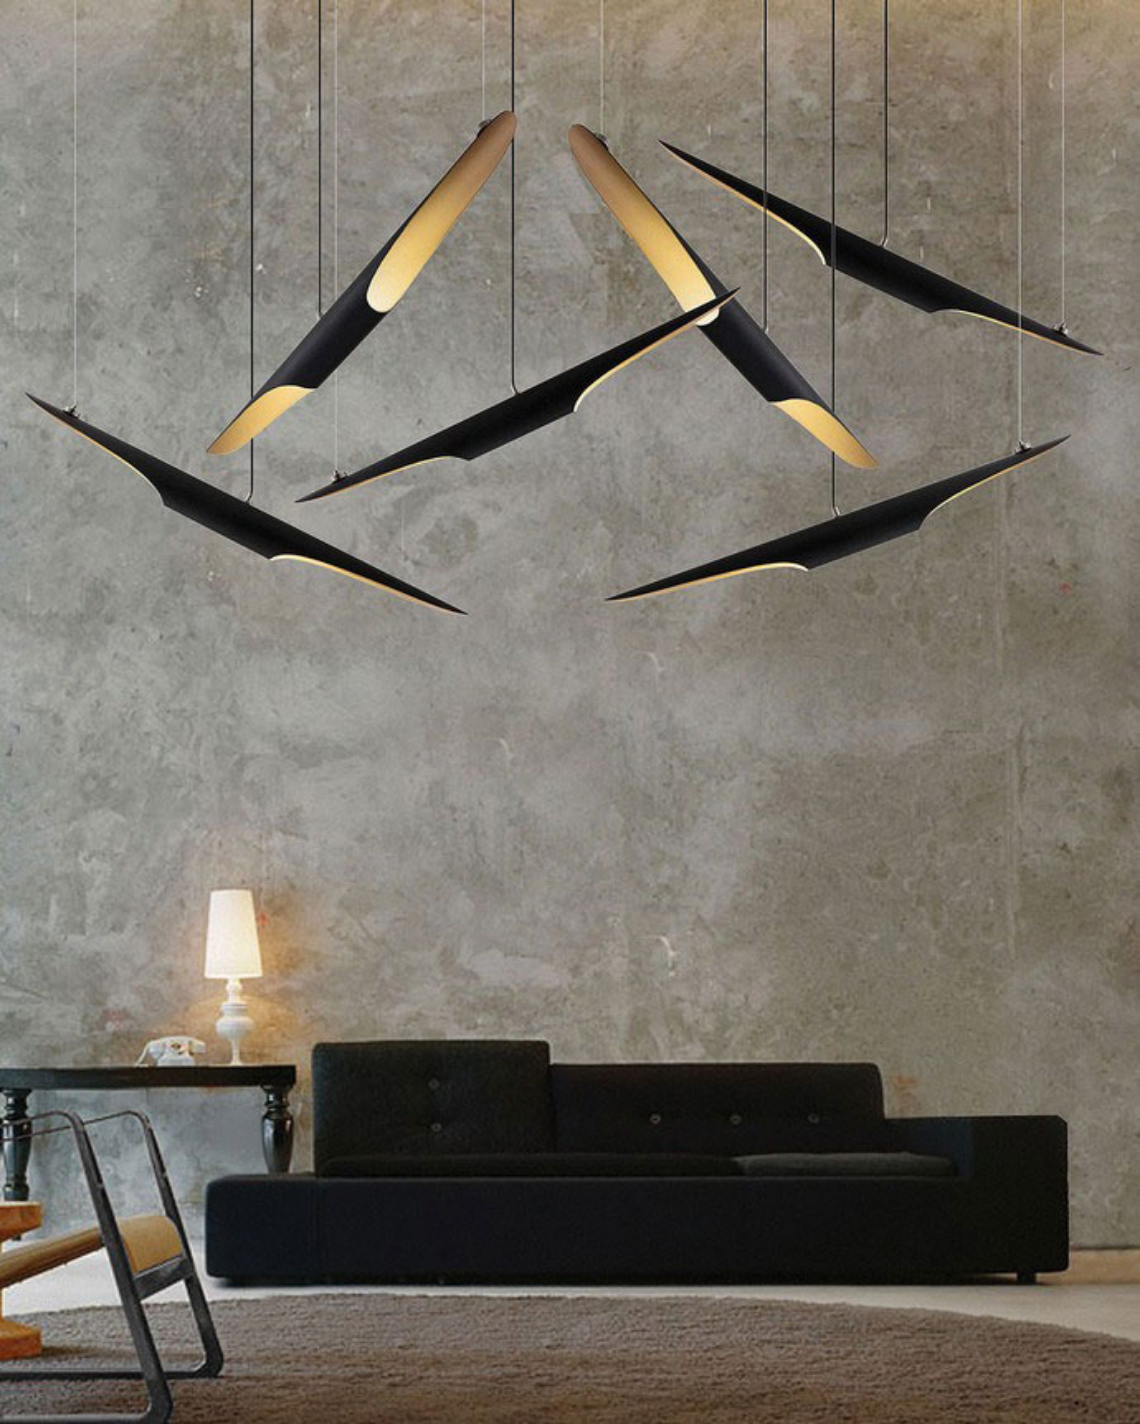 Light Up Your World With These Lighting Ideas